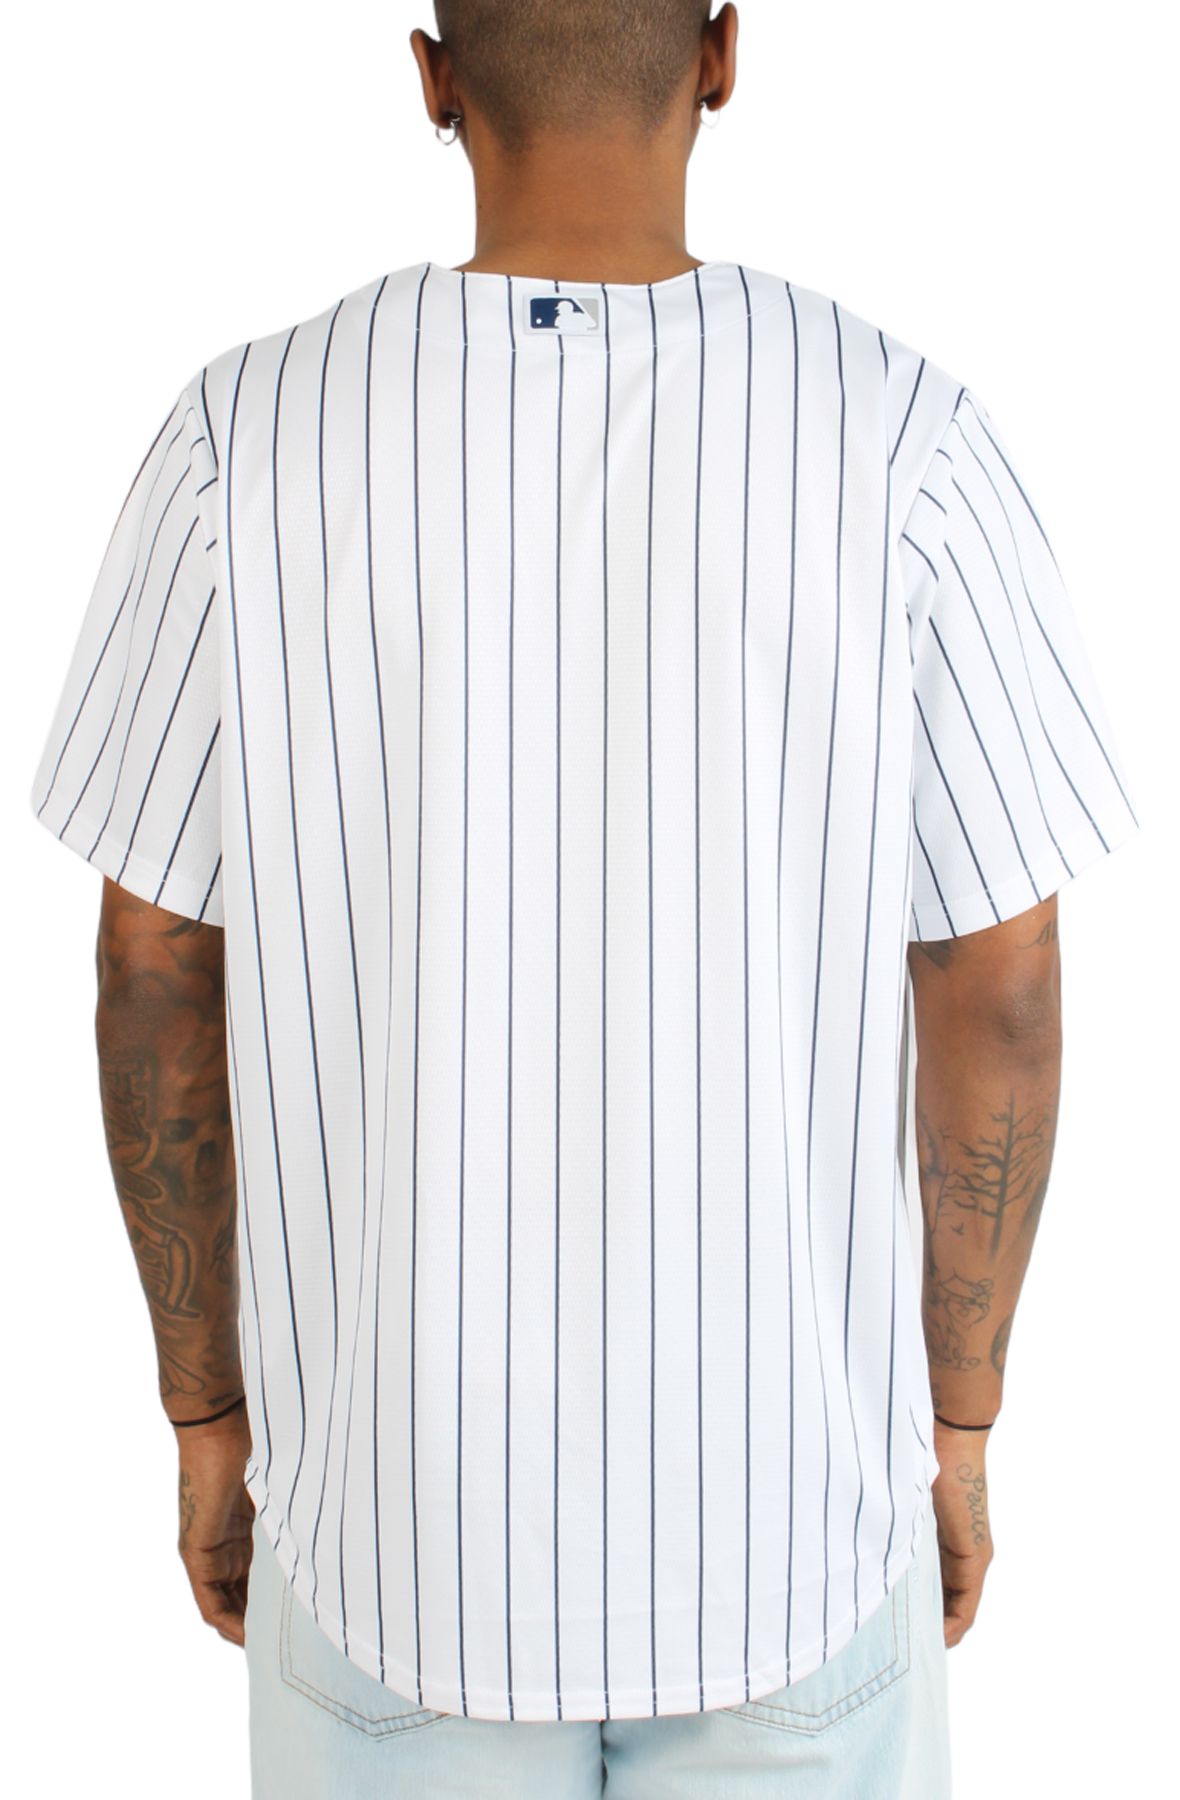 New York Yankees Jersey - By Majestic - Home White Pin Stripe - Mens Extra  Large